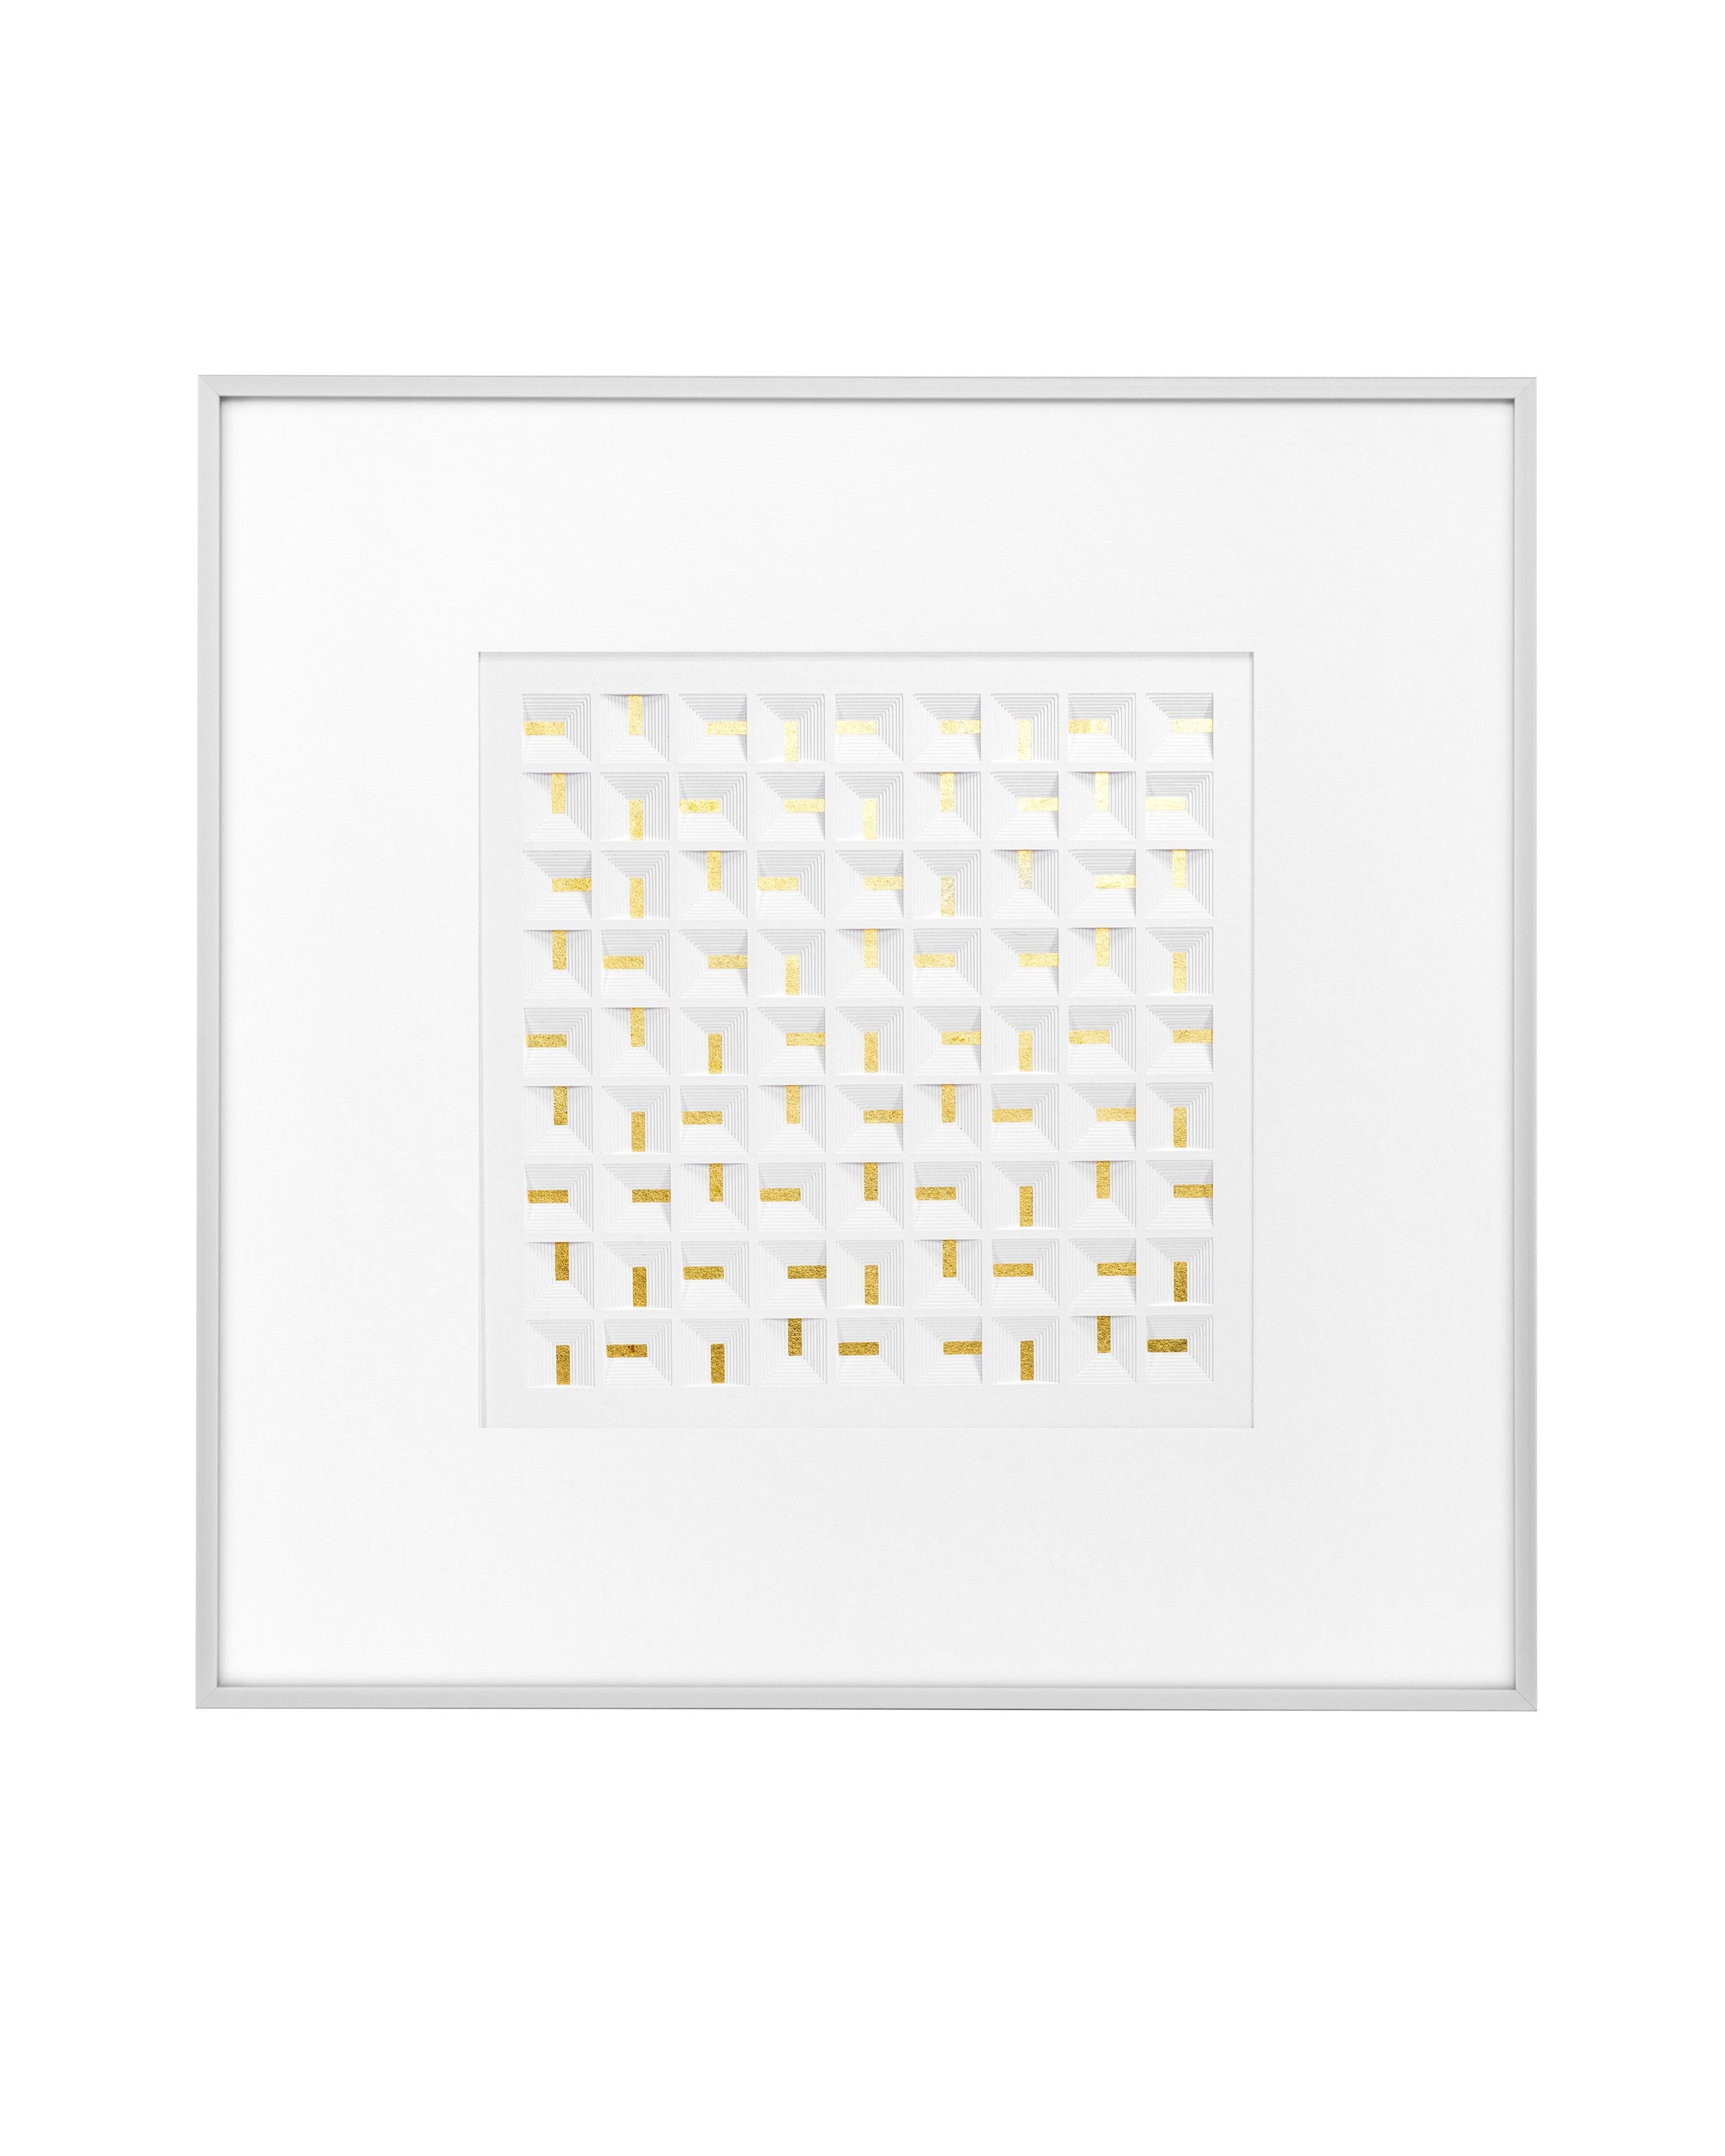 Large Square Paper Wall Art White Wall Decoration, Modern White Geometric  Wall Decor, Contemporary Home Decor, Moduuli Large Square 